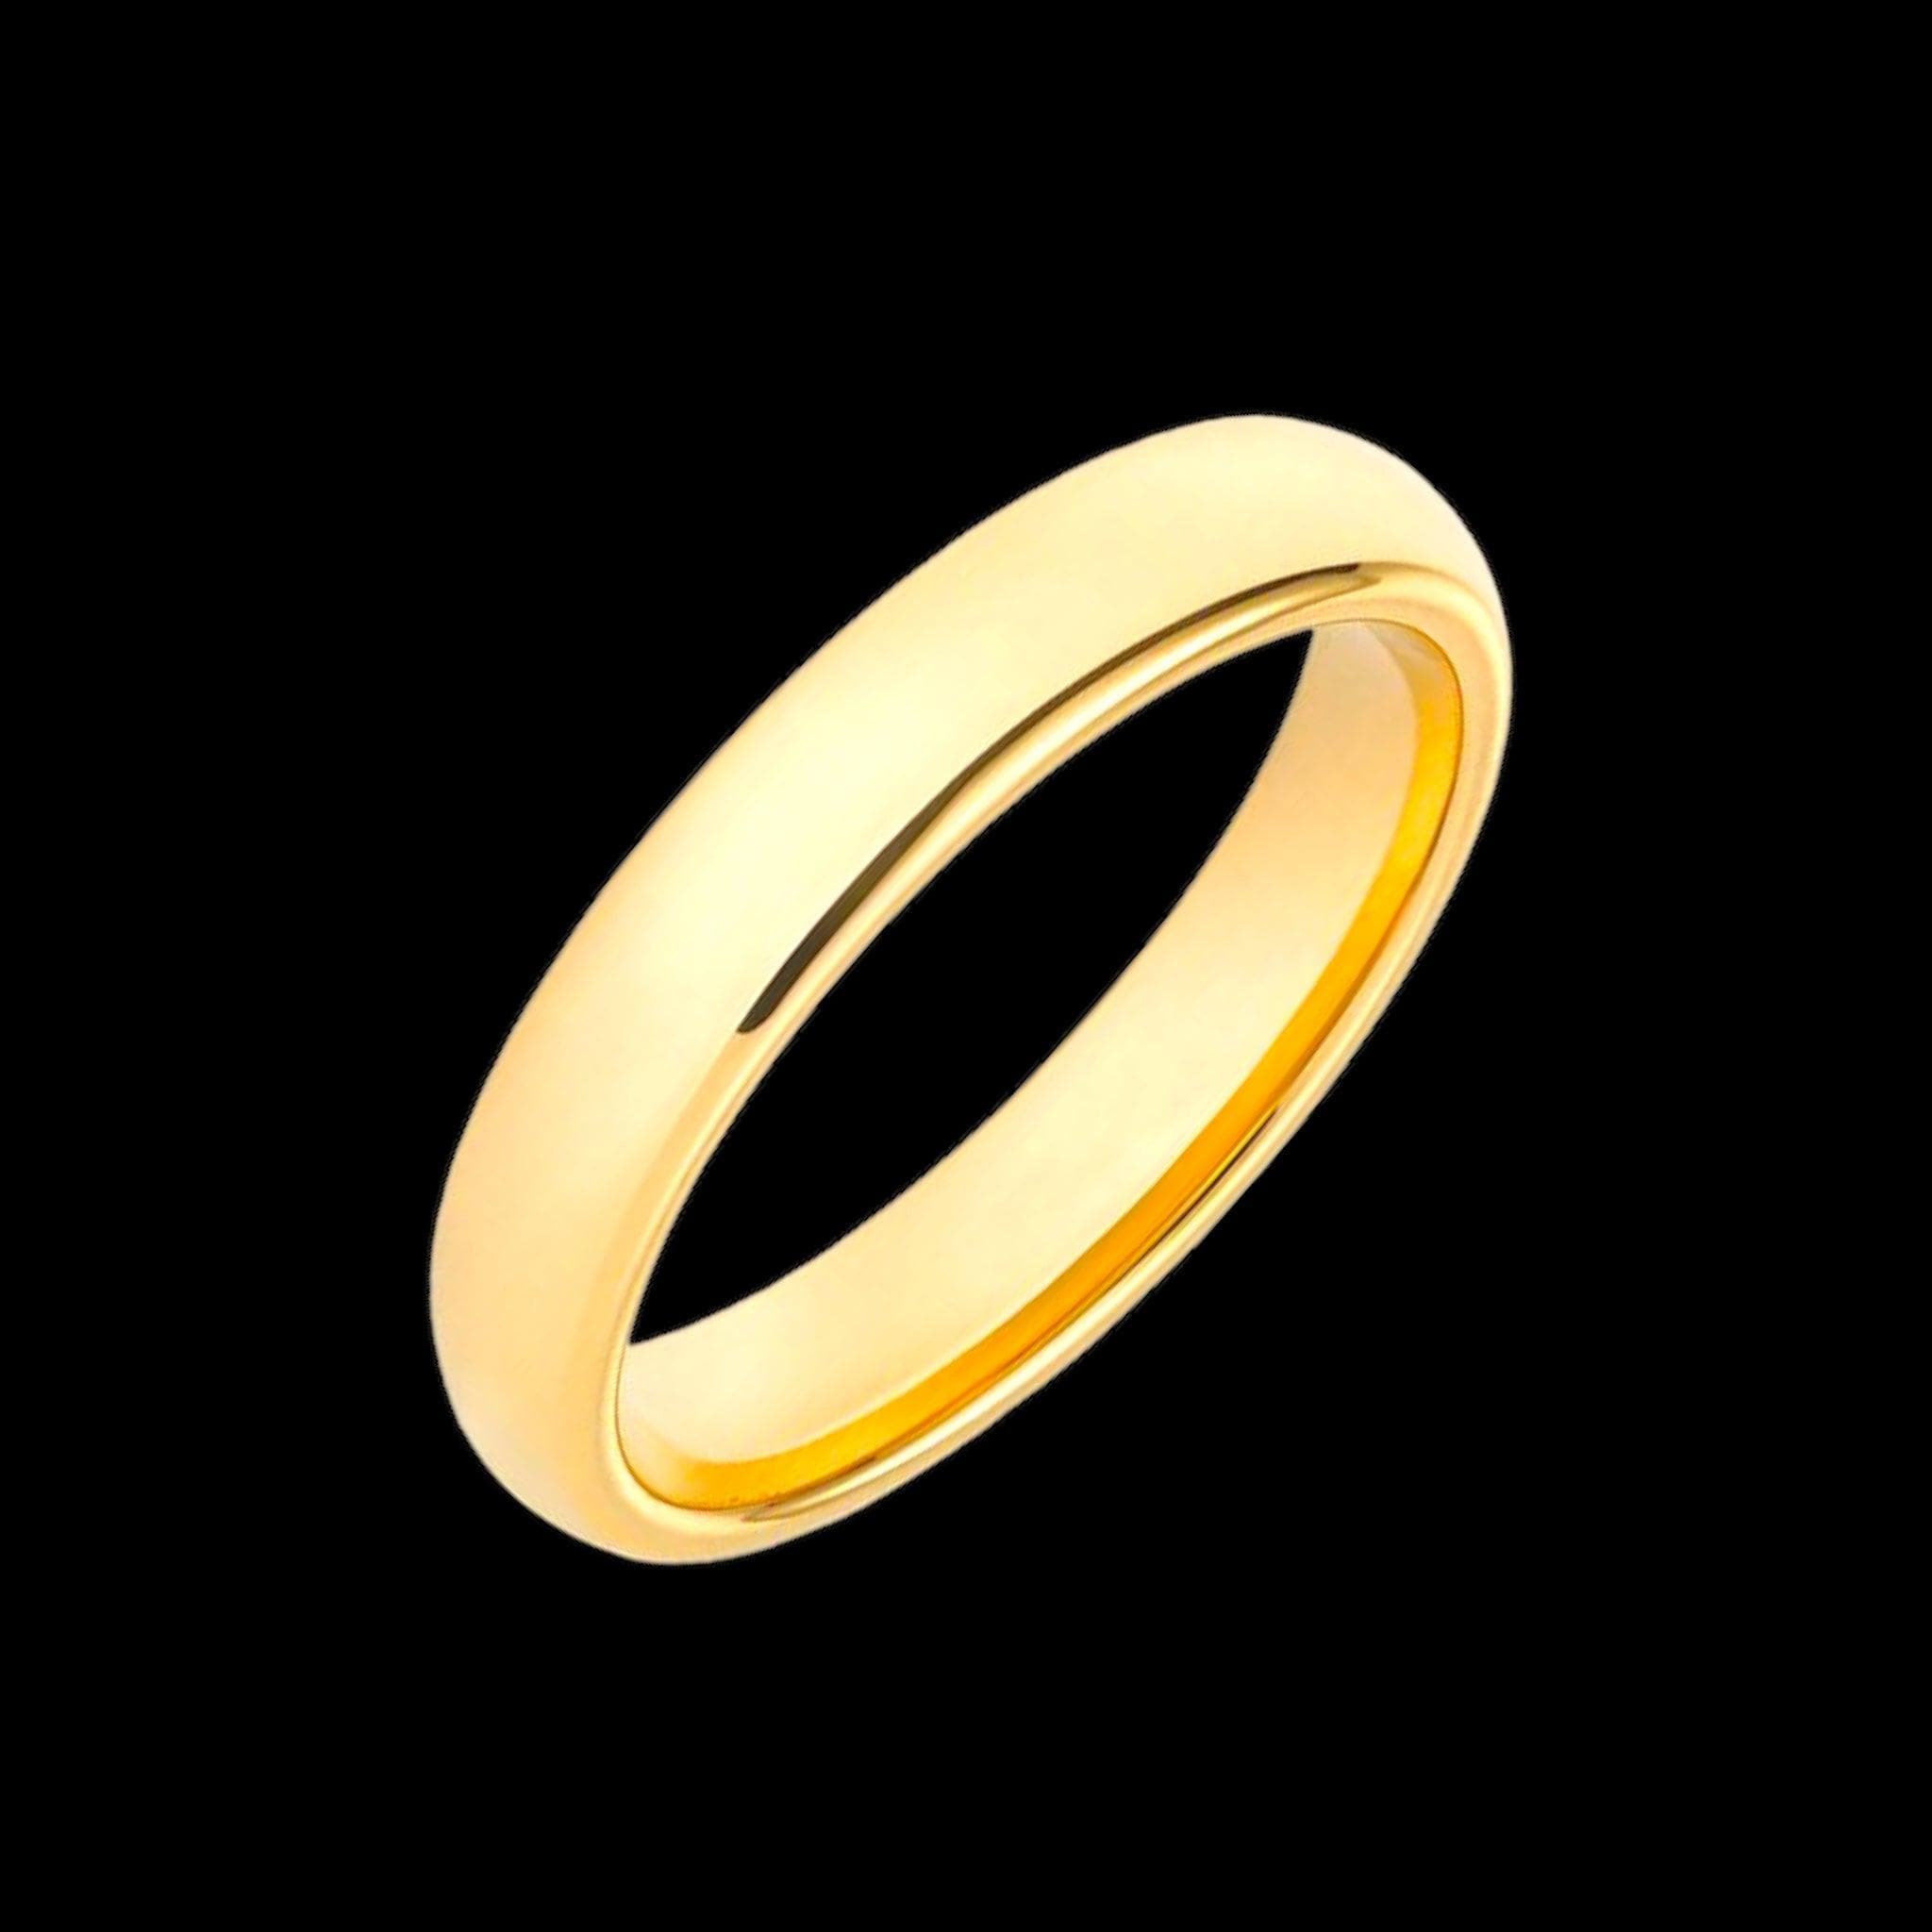 316L Stainless Steel 4mm Classic Gold Band Ring- kuania oro laminado